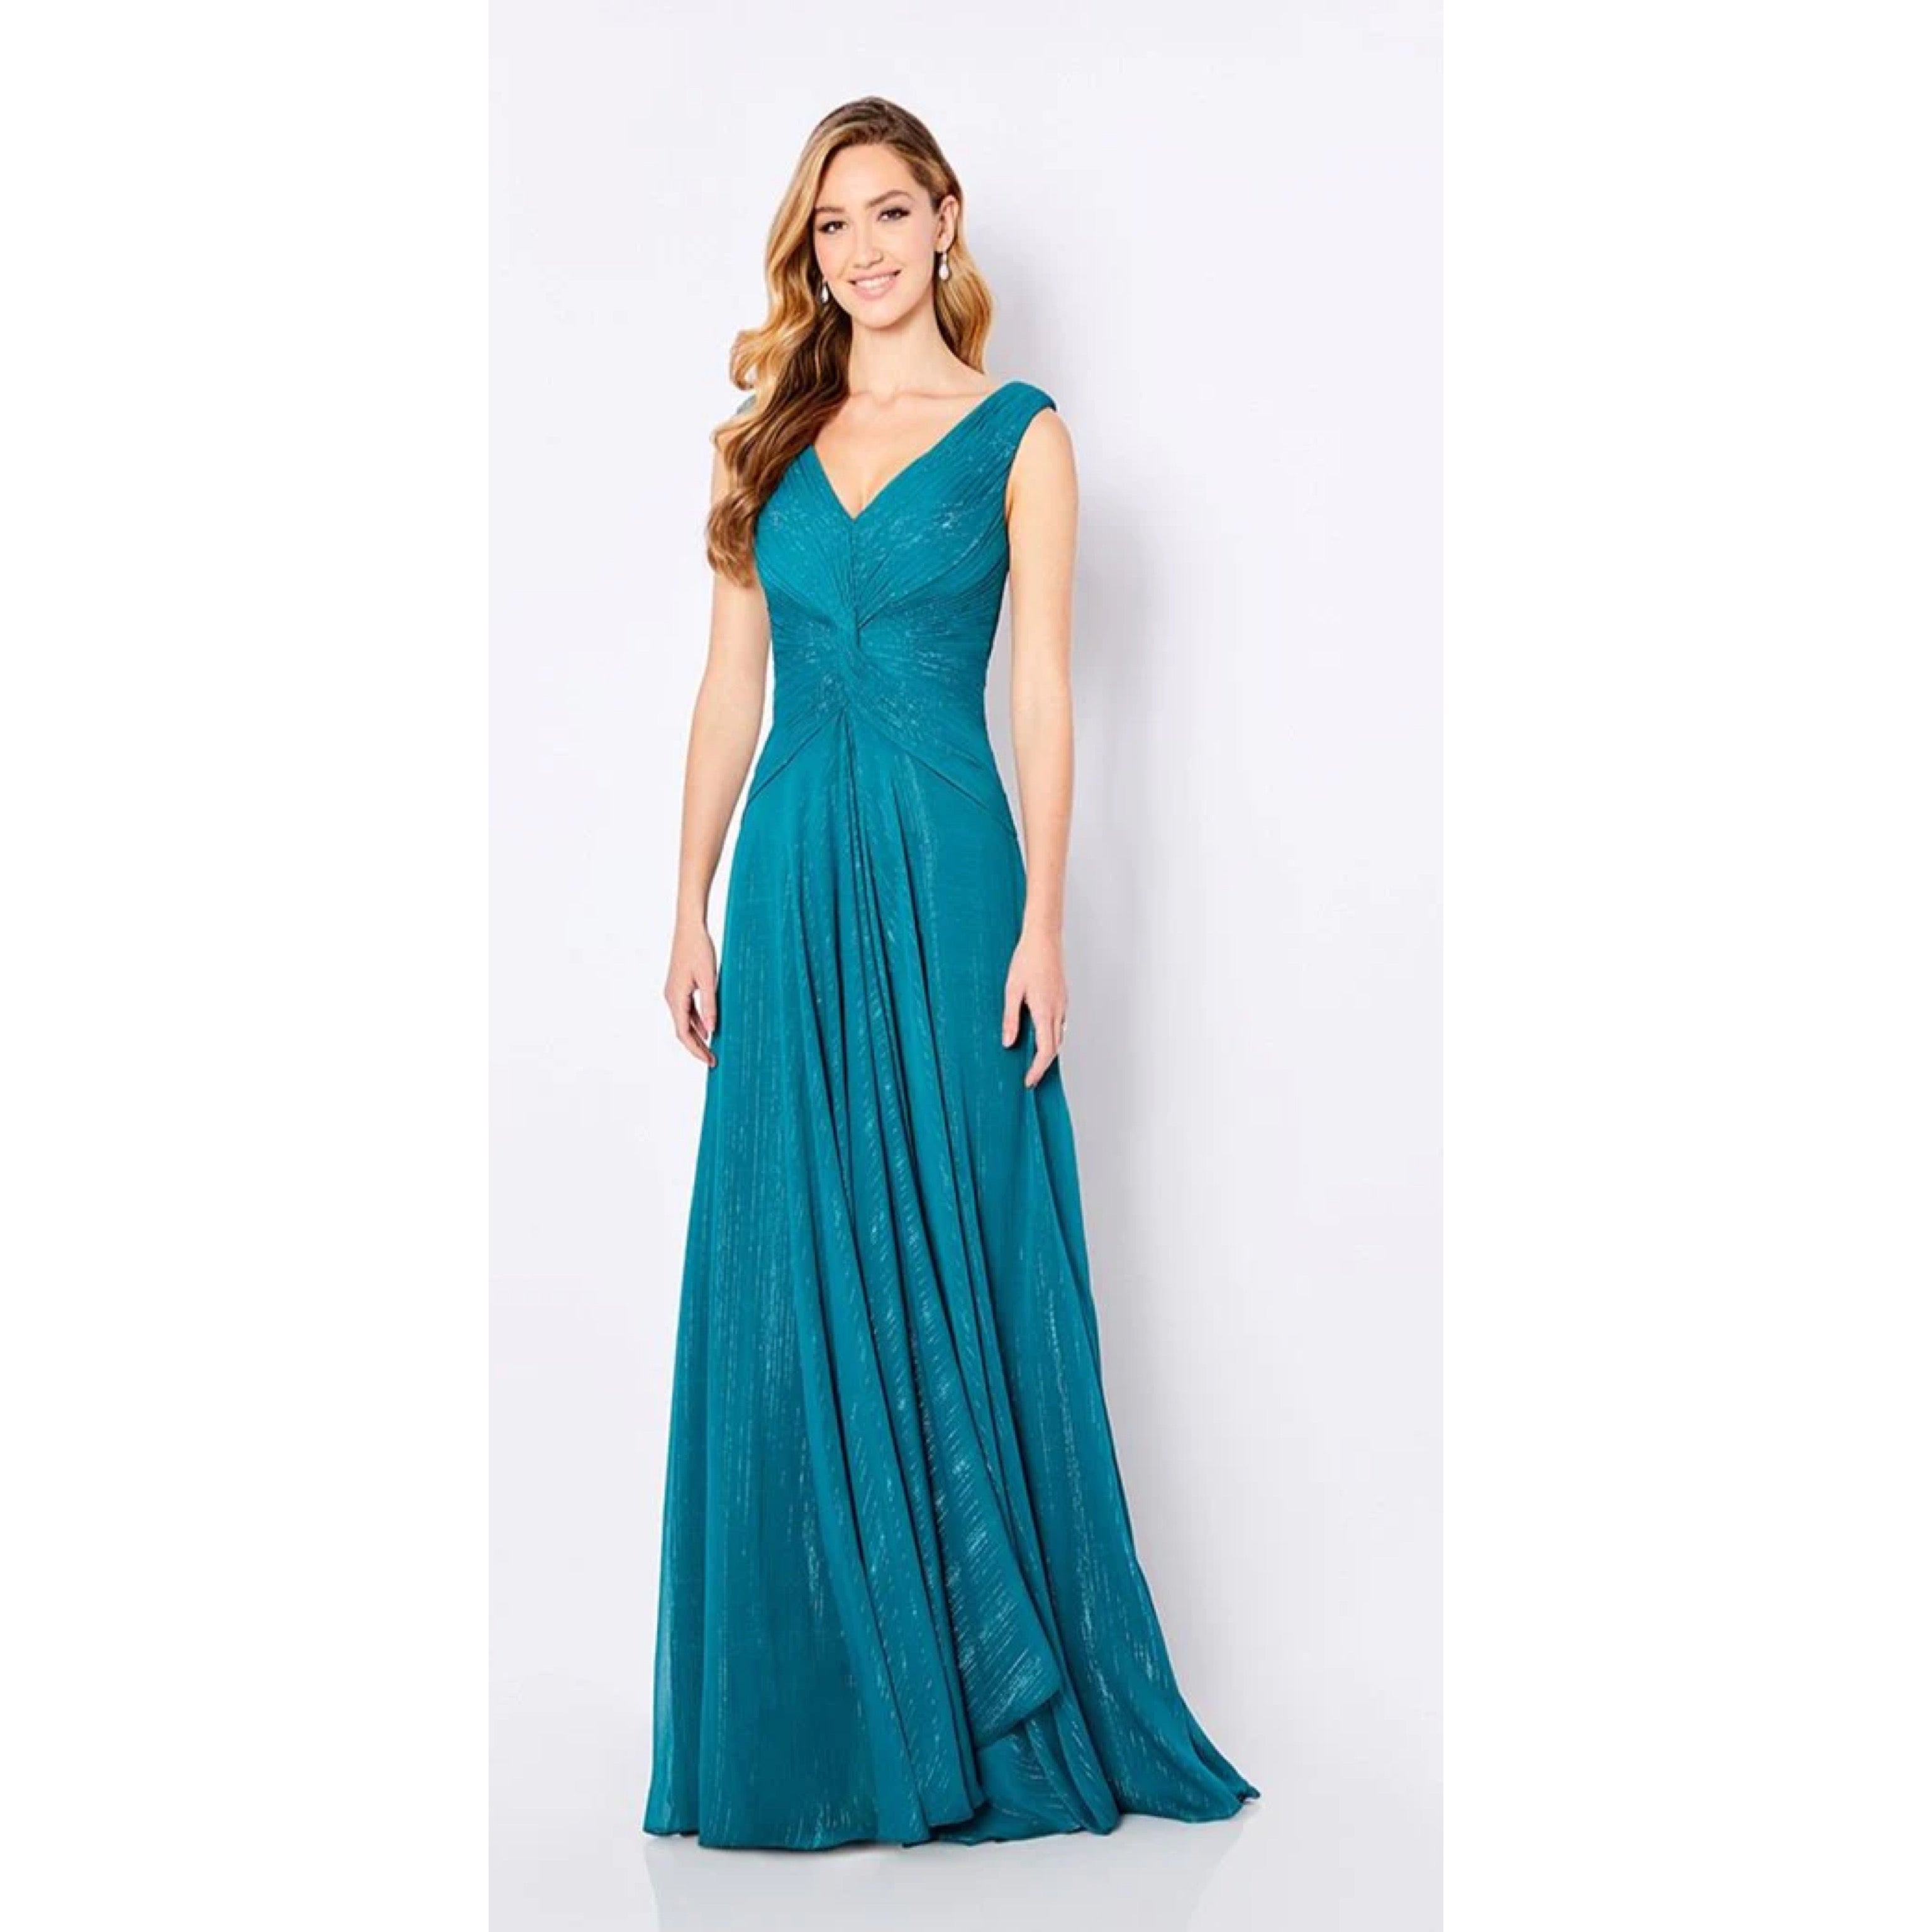 Cameron Blake evergreen dress, size 16, NEW WITH TAGS!